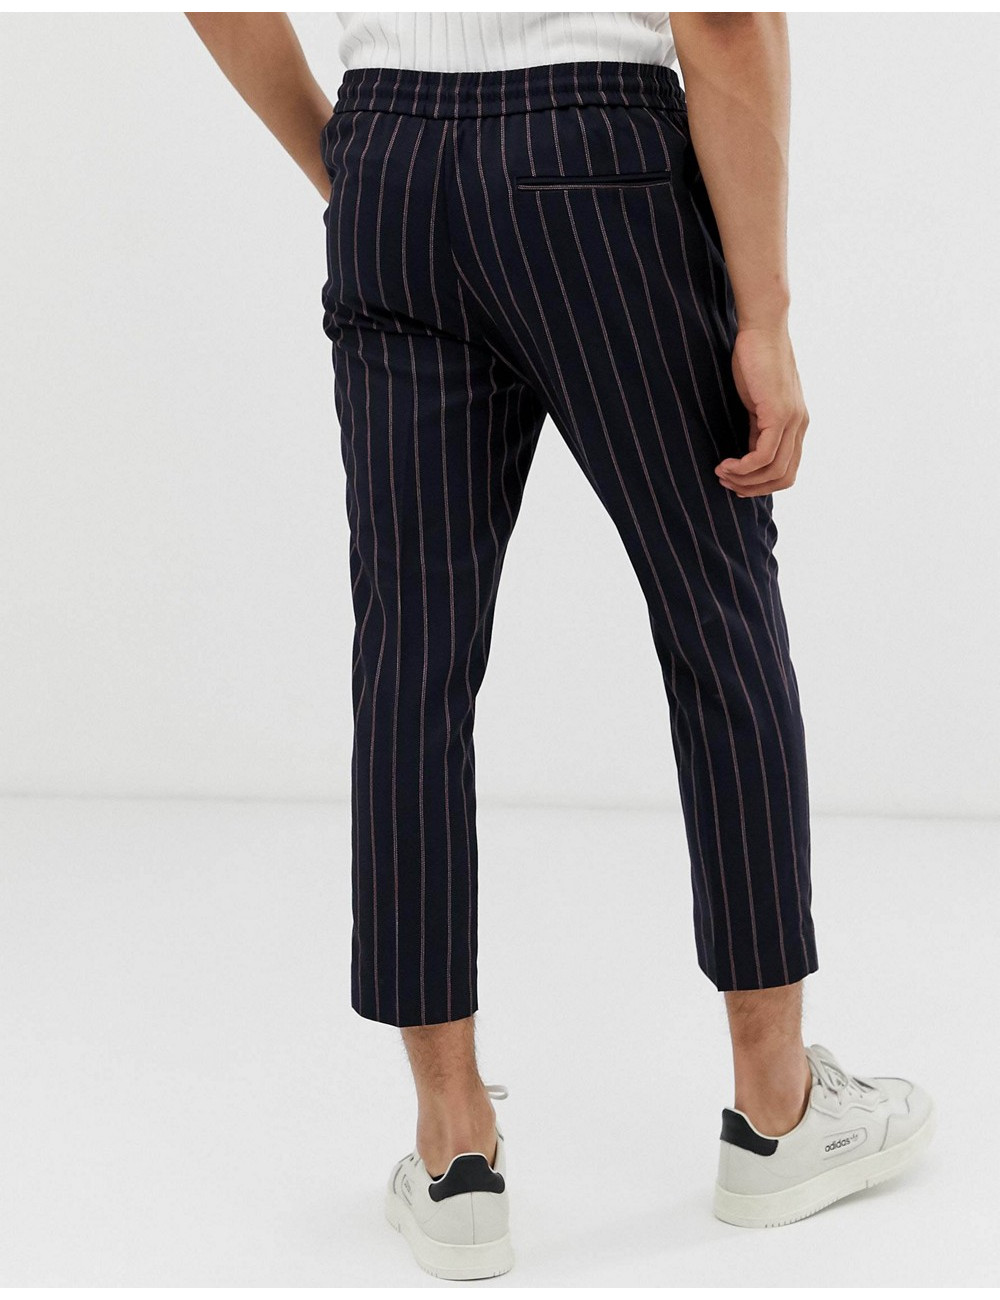 New Look pinstripe trousers...